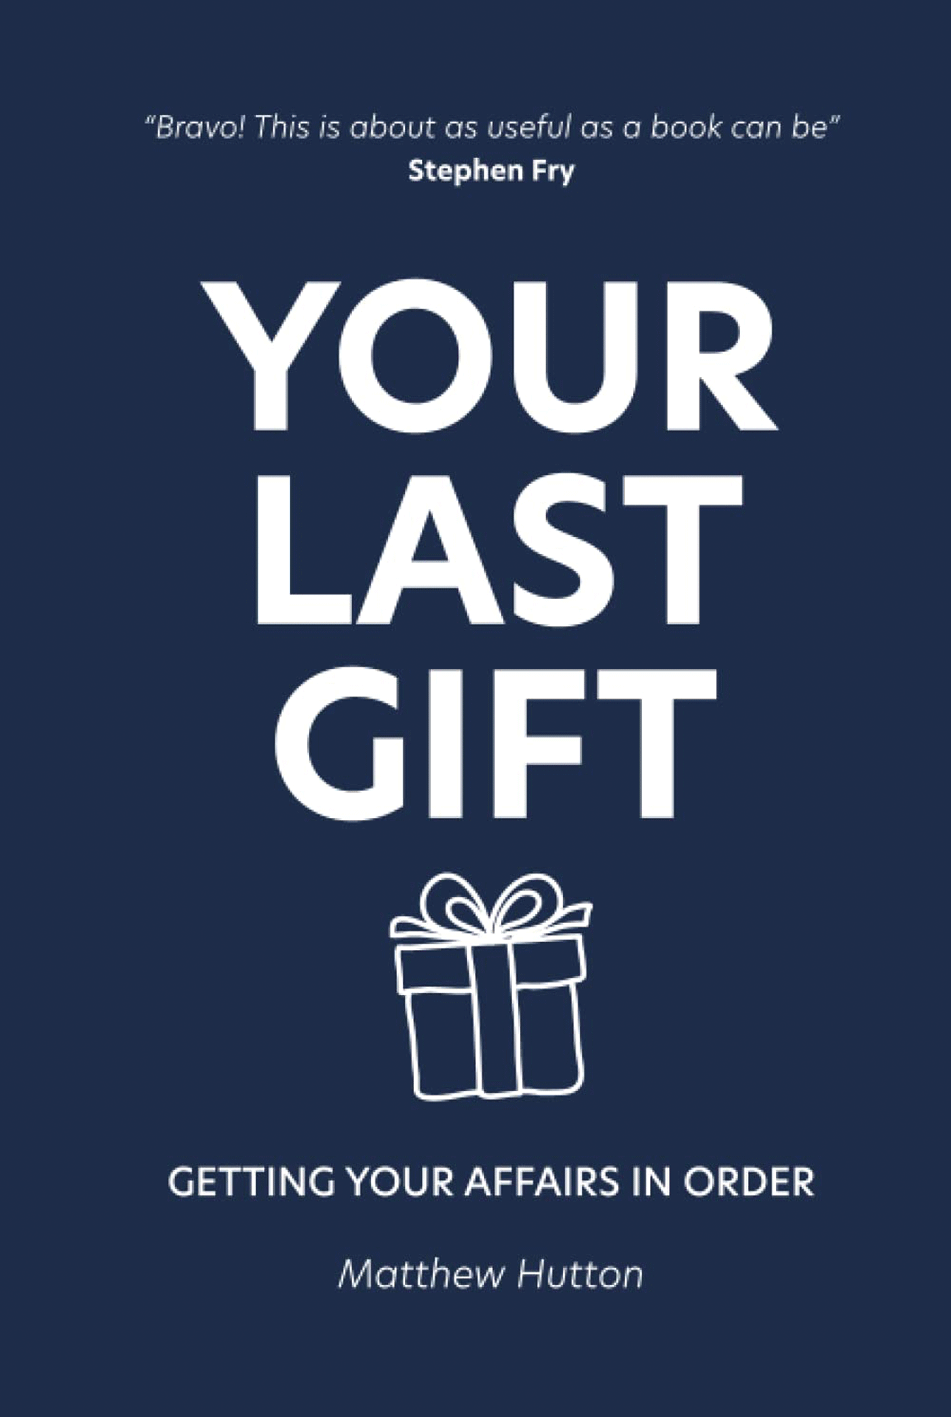 Your-last-gift-book